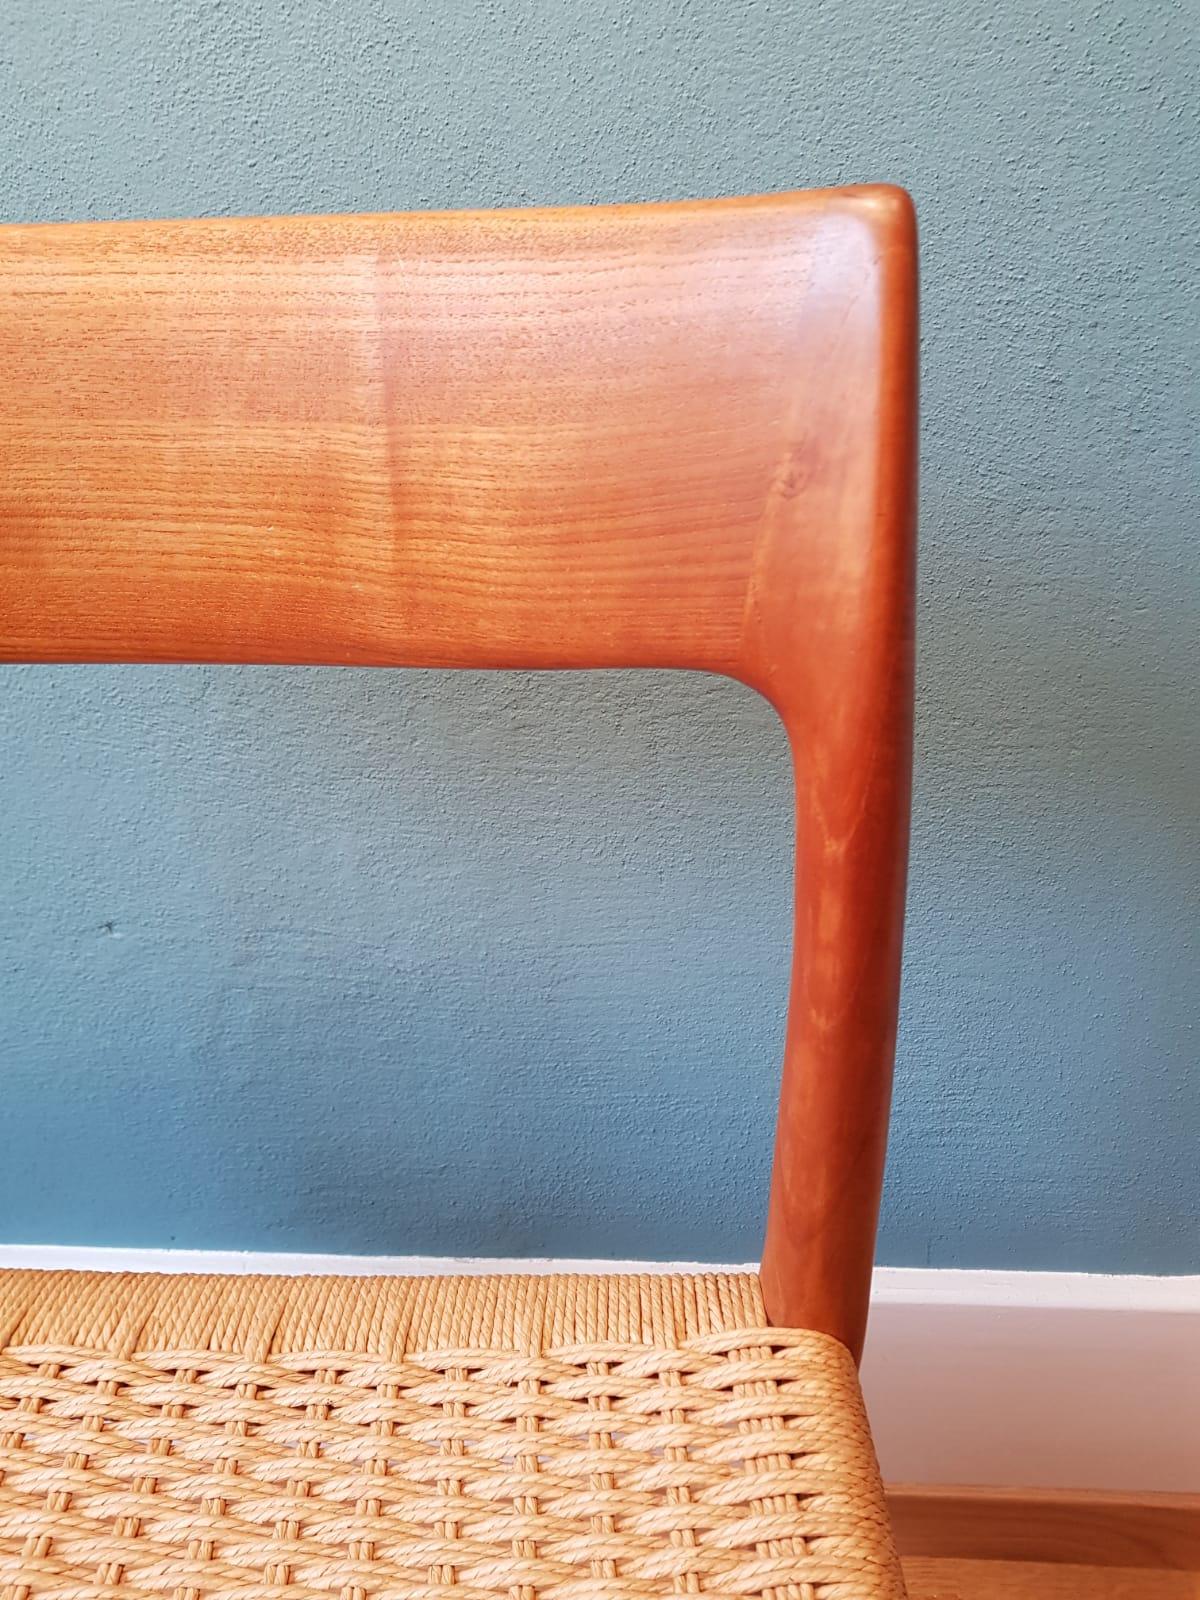 Made of solid teak, elegant and comfortable shape. The set is in a very good condition, the papercord seating is very stable and has no visible stains, almost perfect!